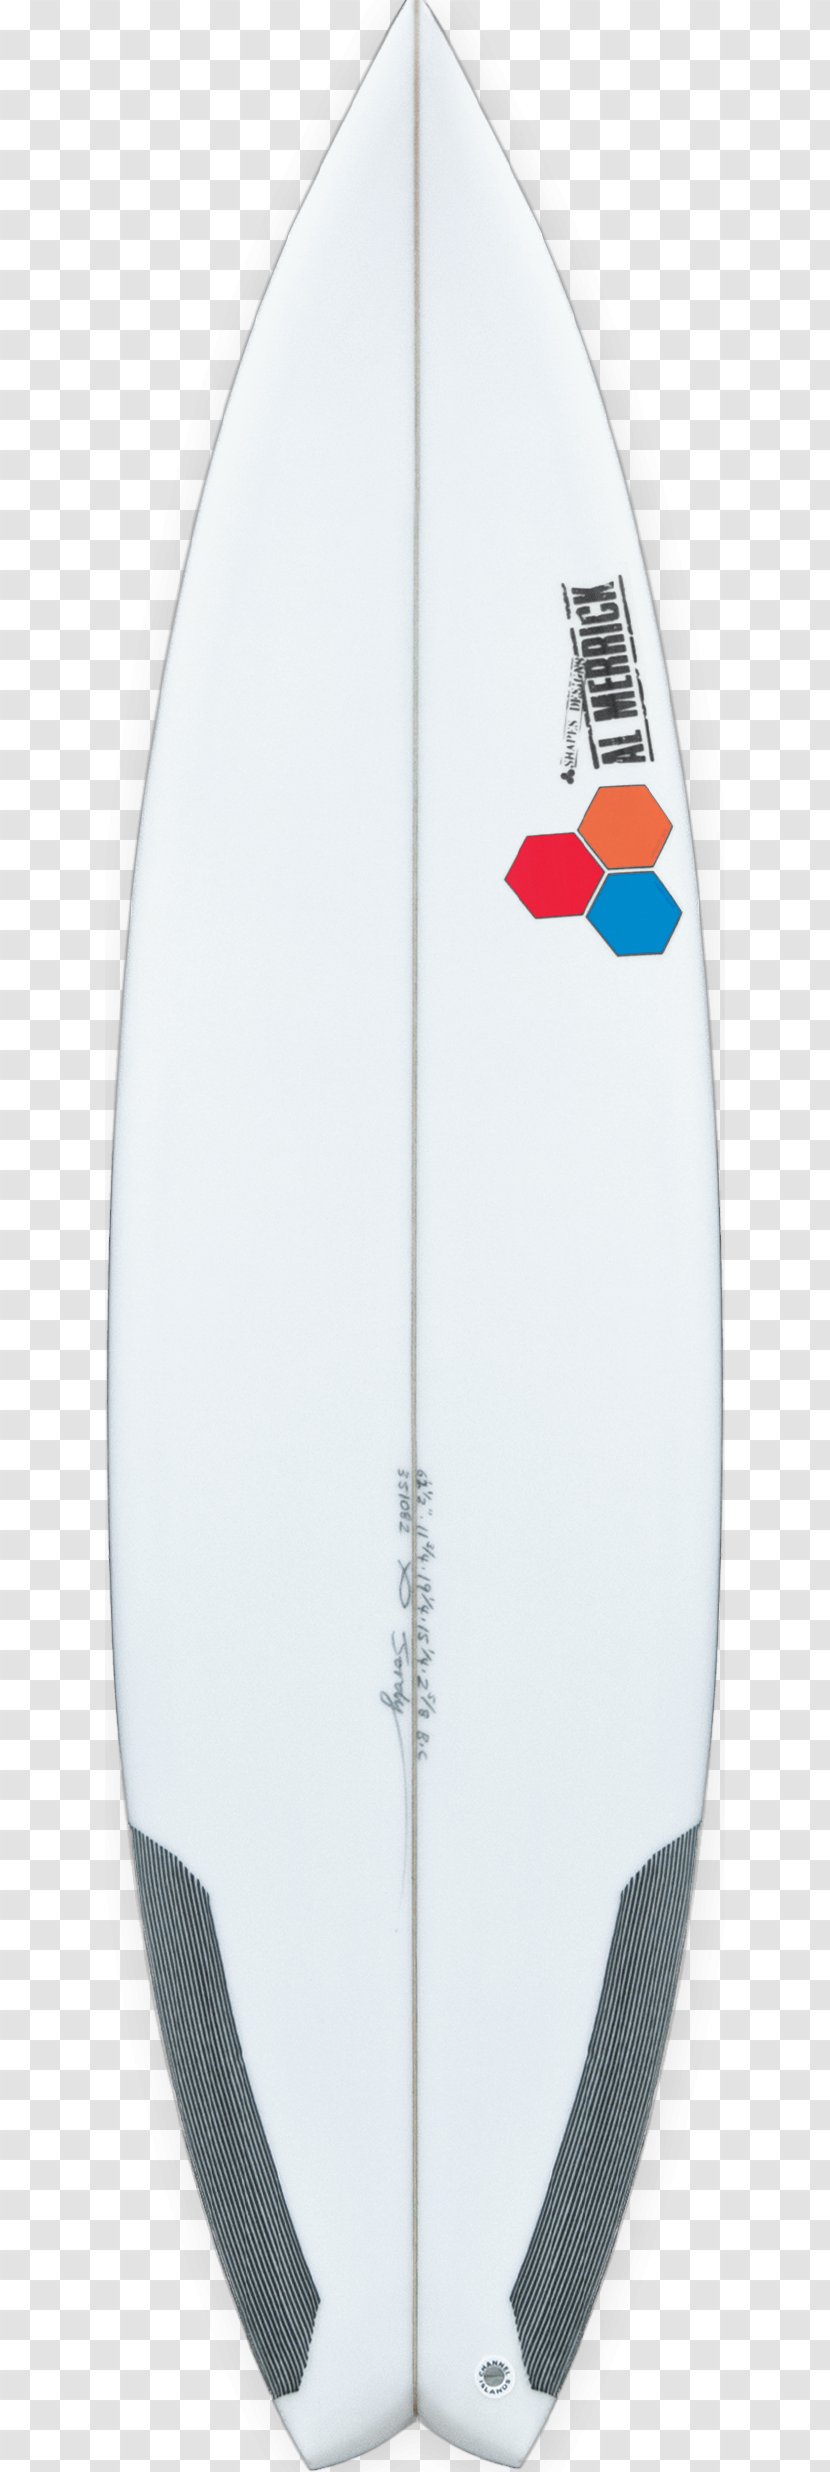 Surfboard Channel Islands Quiksilver Bunny Chow - Design Transparent PNG